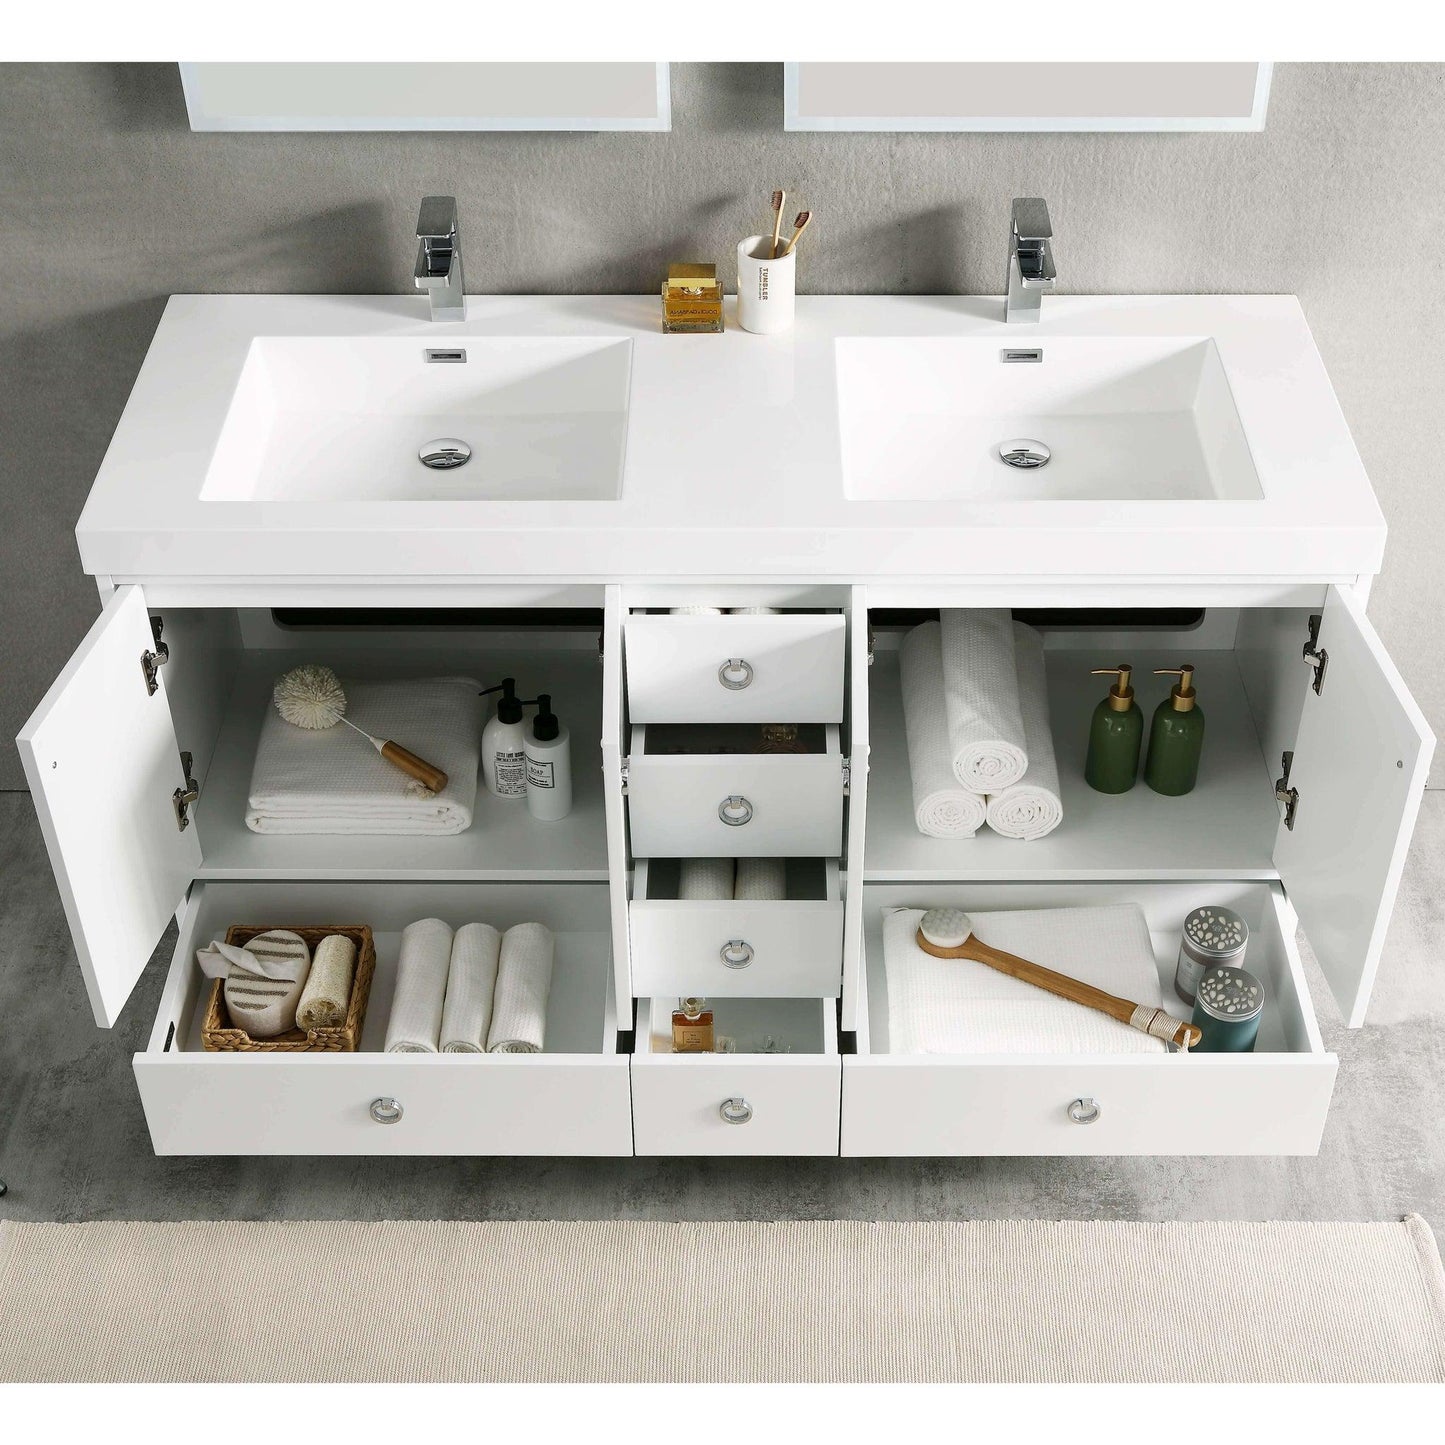 Blossom Lyon 60" 4-Door 2-Drawer Matte White Freestanding Vanity Set With Acrylic Top and Integrated Double Sinks